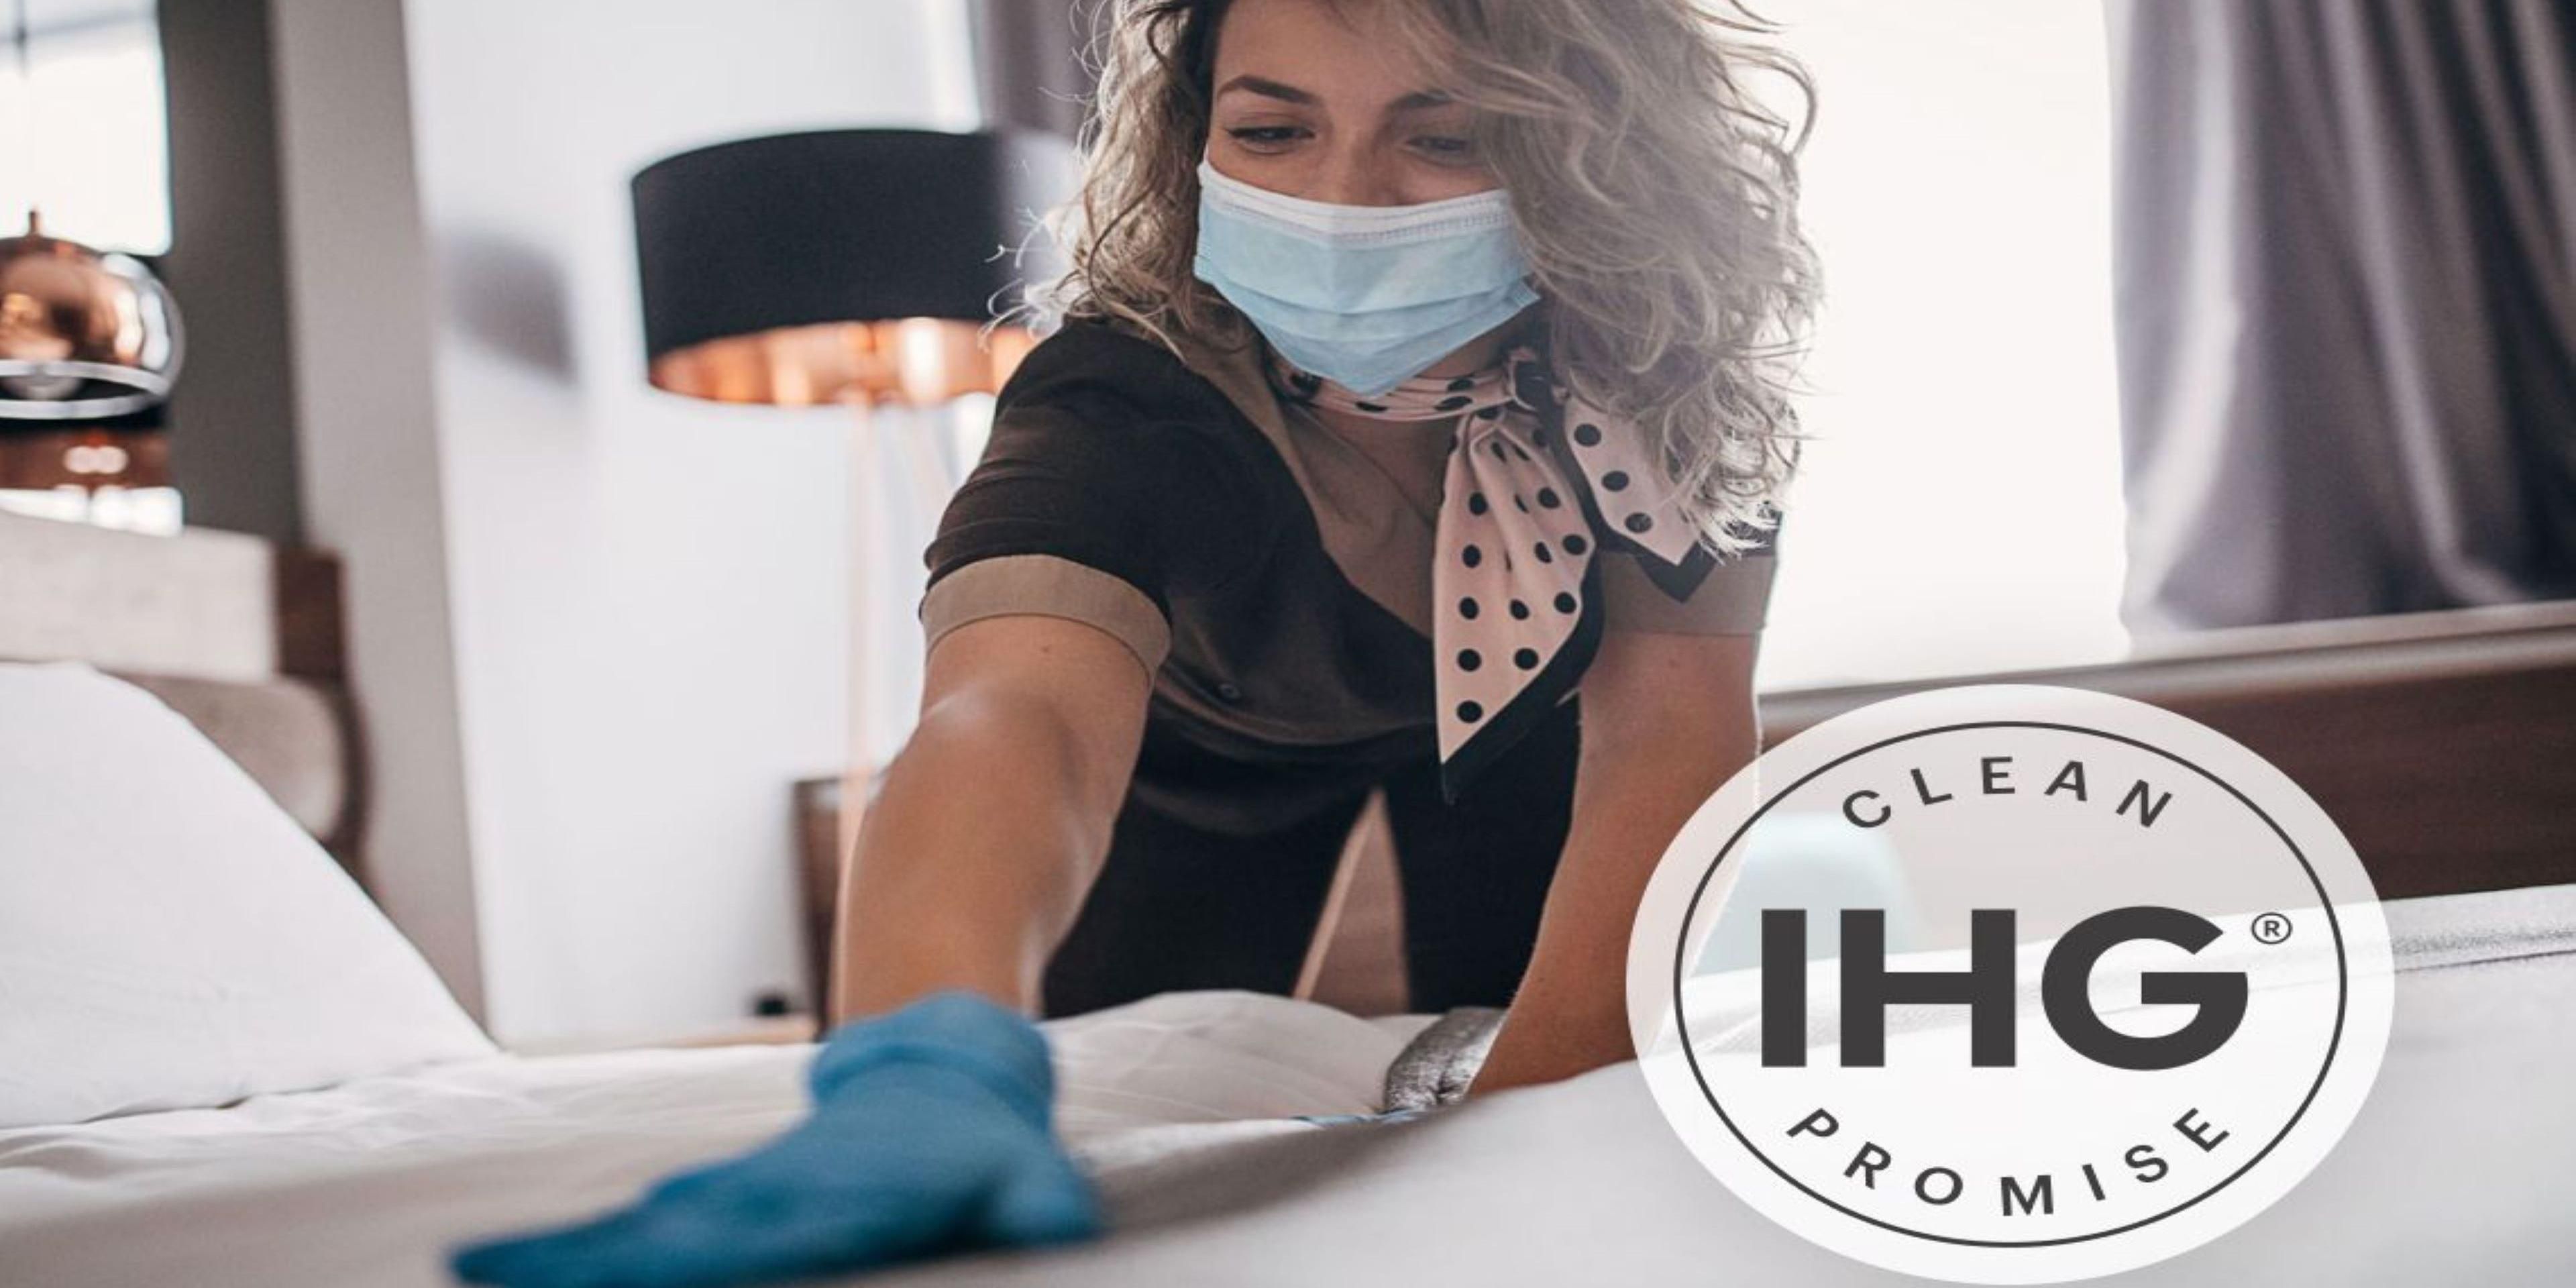 Travel with Peace of Mind. IHG Way of Clean is a robust, 360-degree cleanliness response program providing a comprehensive set of tools, training and equipment to ensure your safety. Join us in wishing 2021 to be a year of Health, Happiness, and HOPE.
